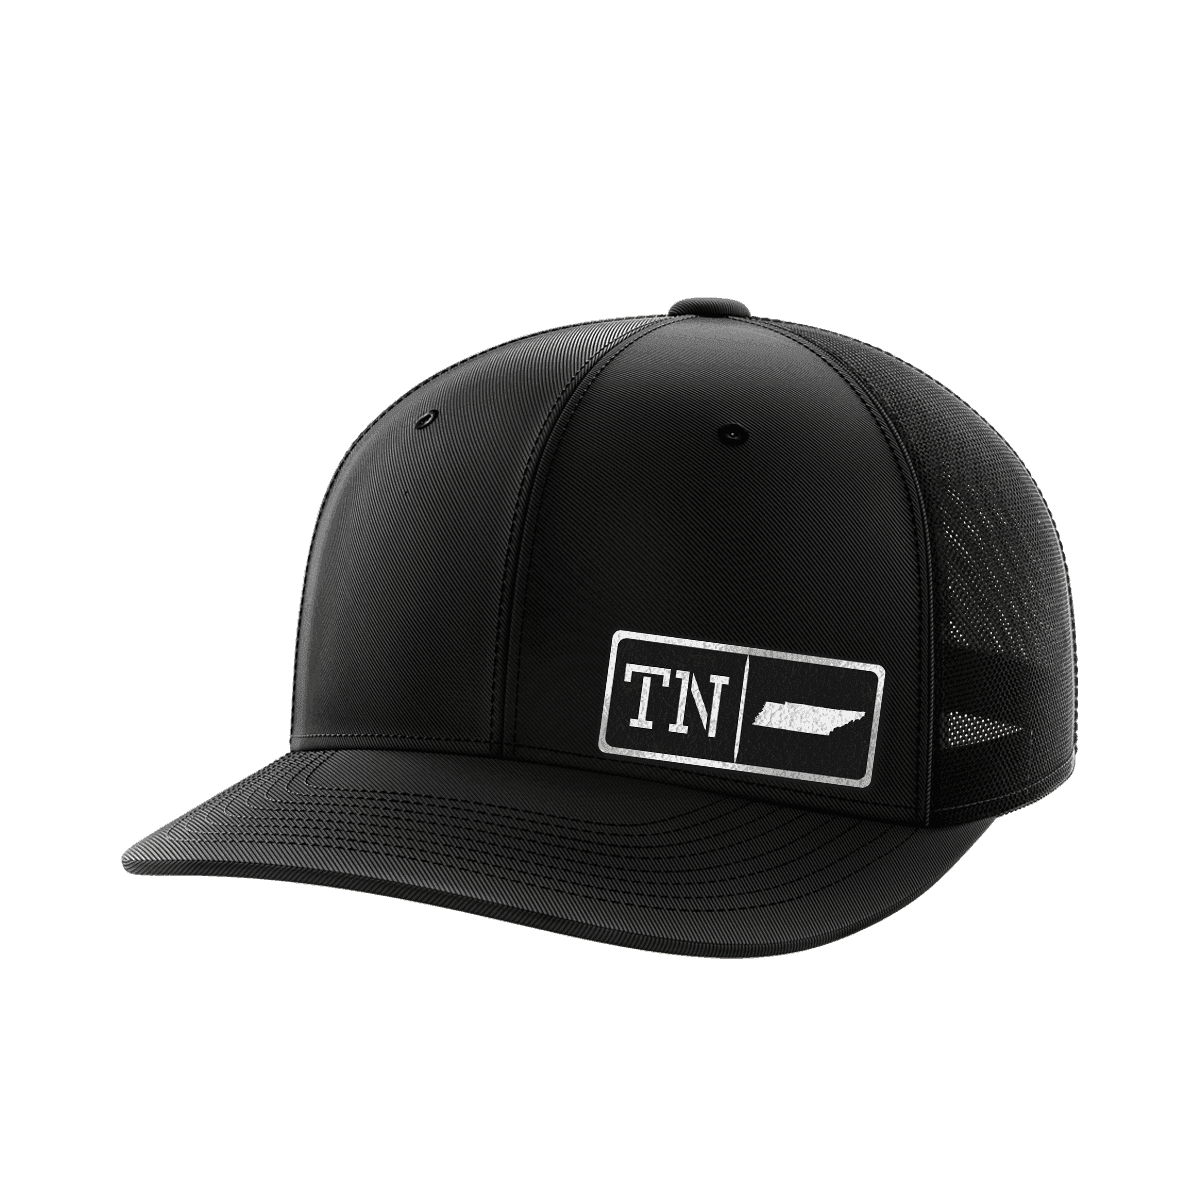 Tennessee Homegrown Collection (black leather)